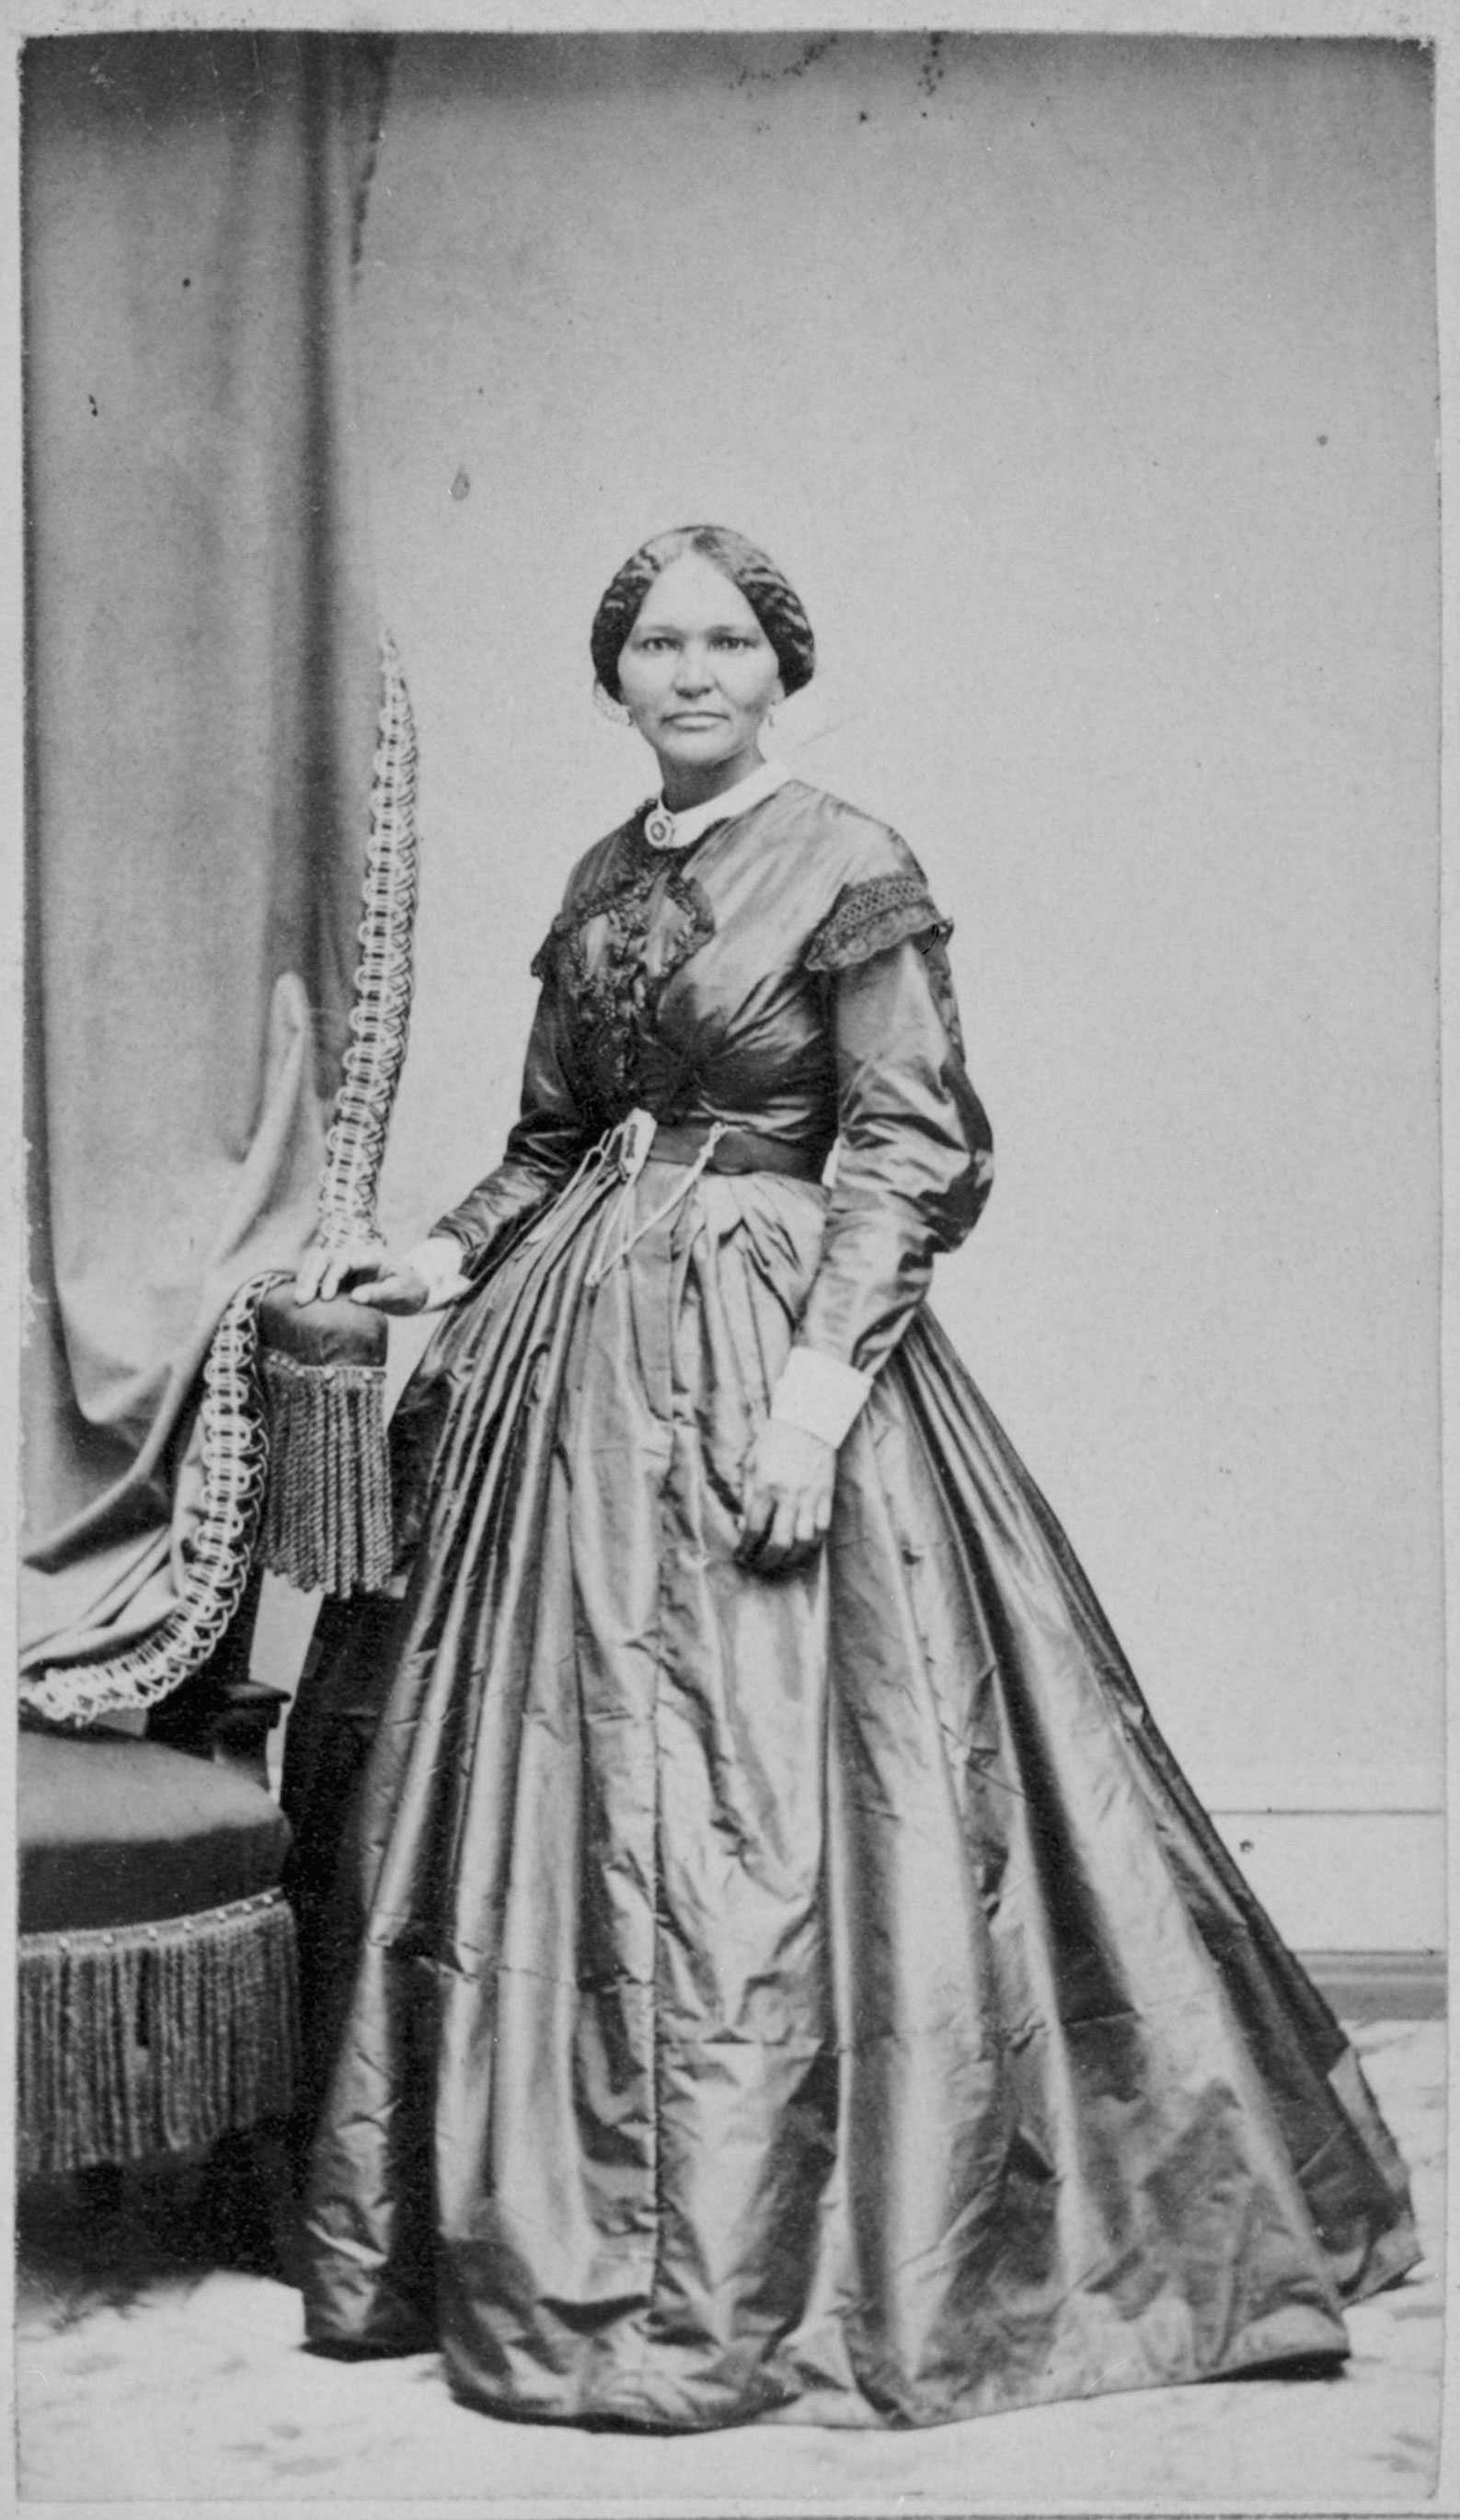 Elizabeth Keckly posed for a portrait. She stands in an elaborate gown with her hand resting on a chair.